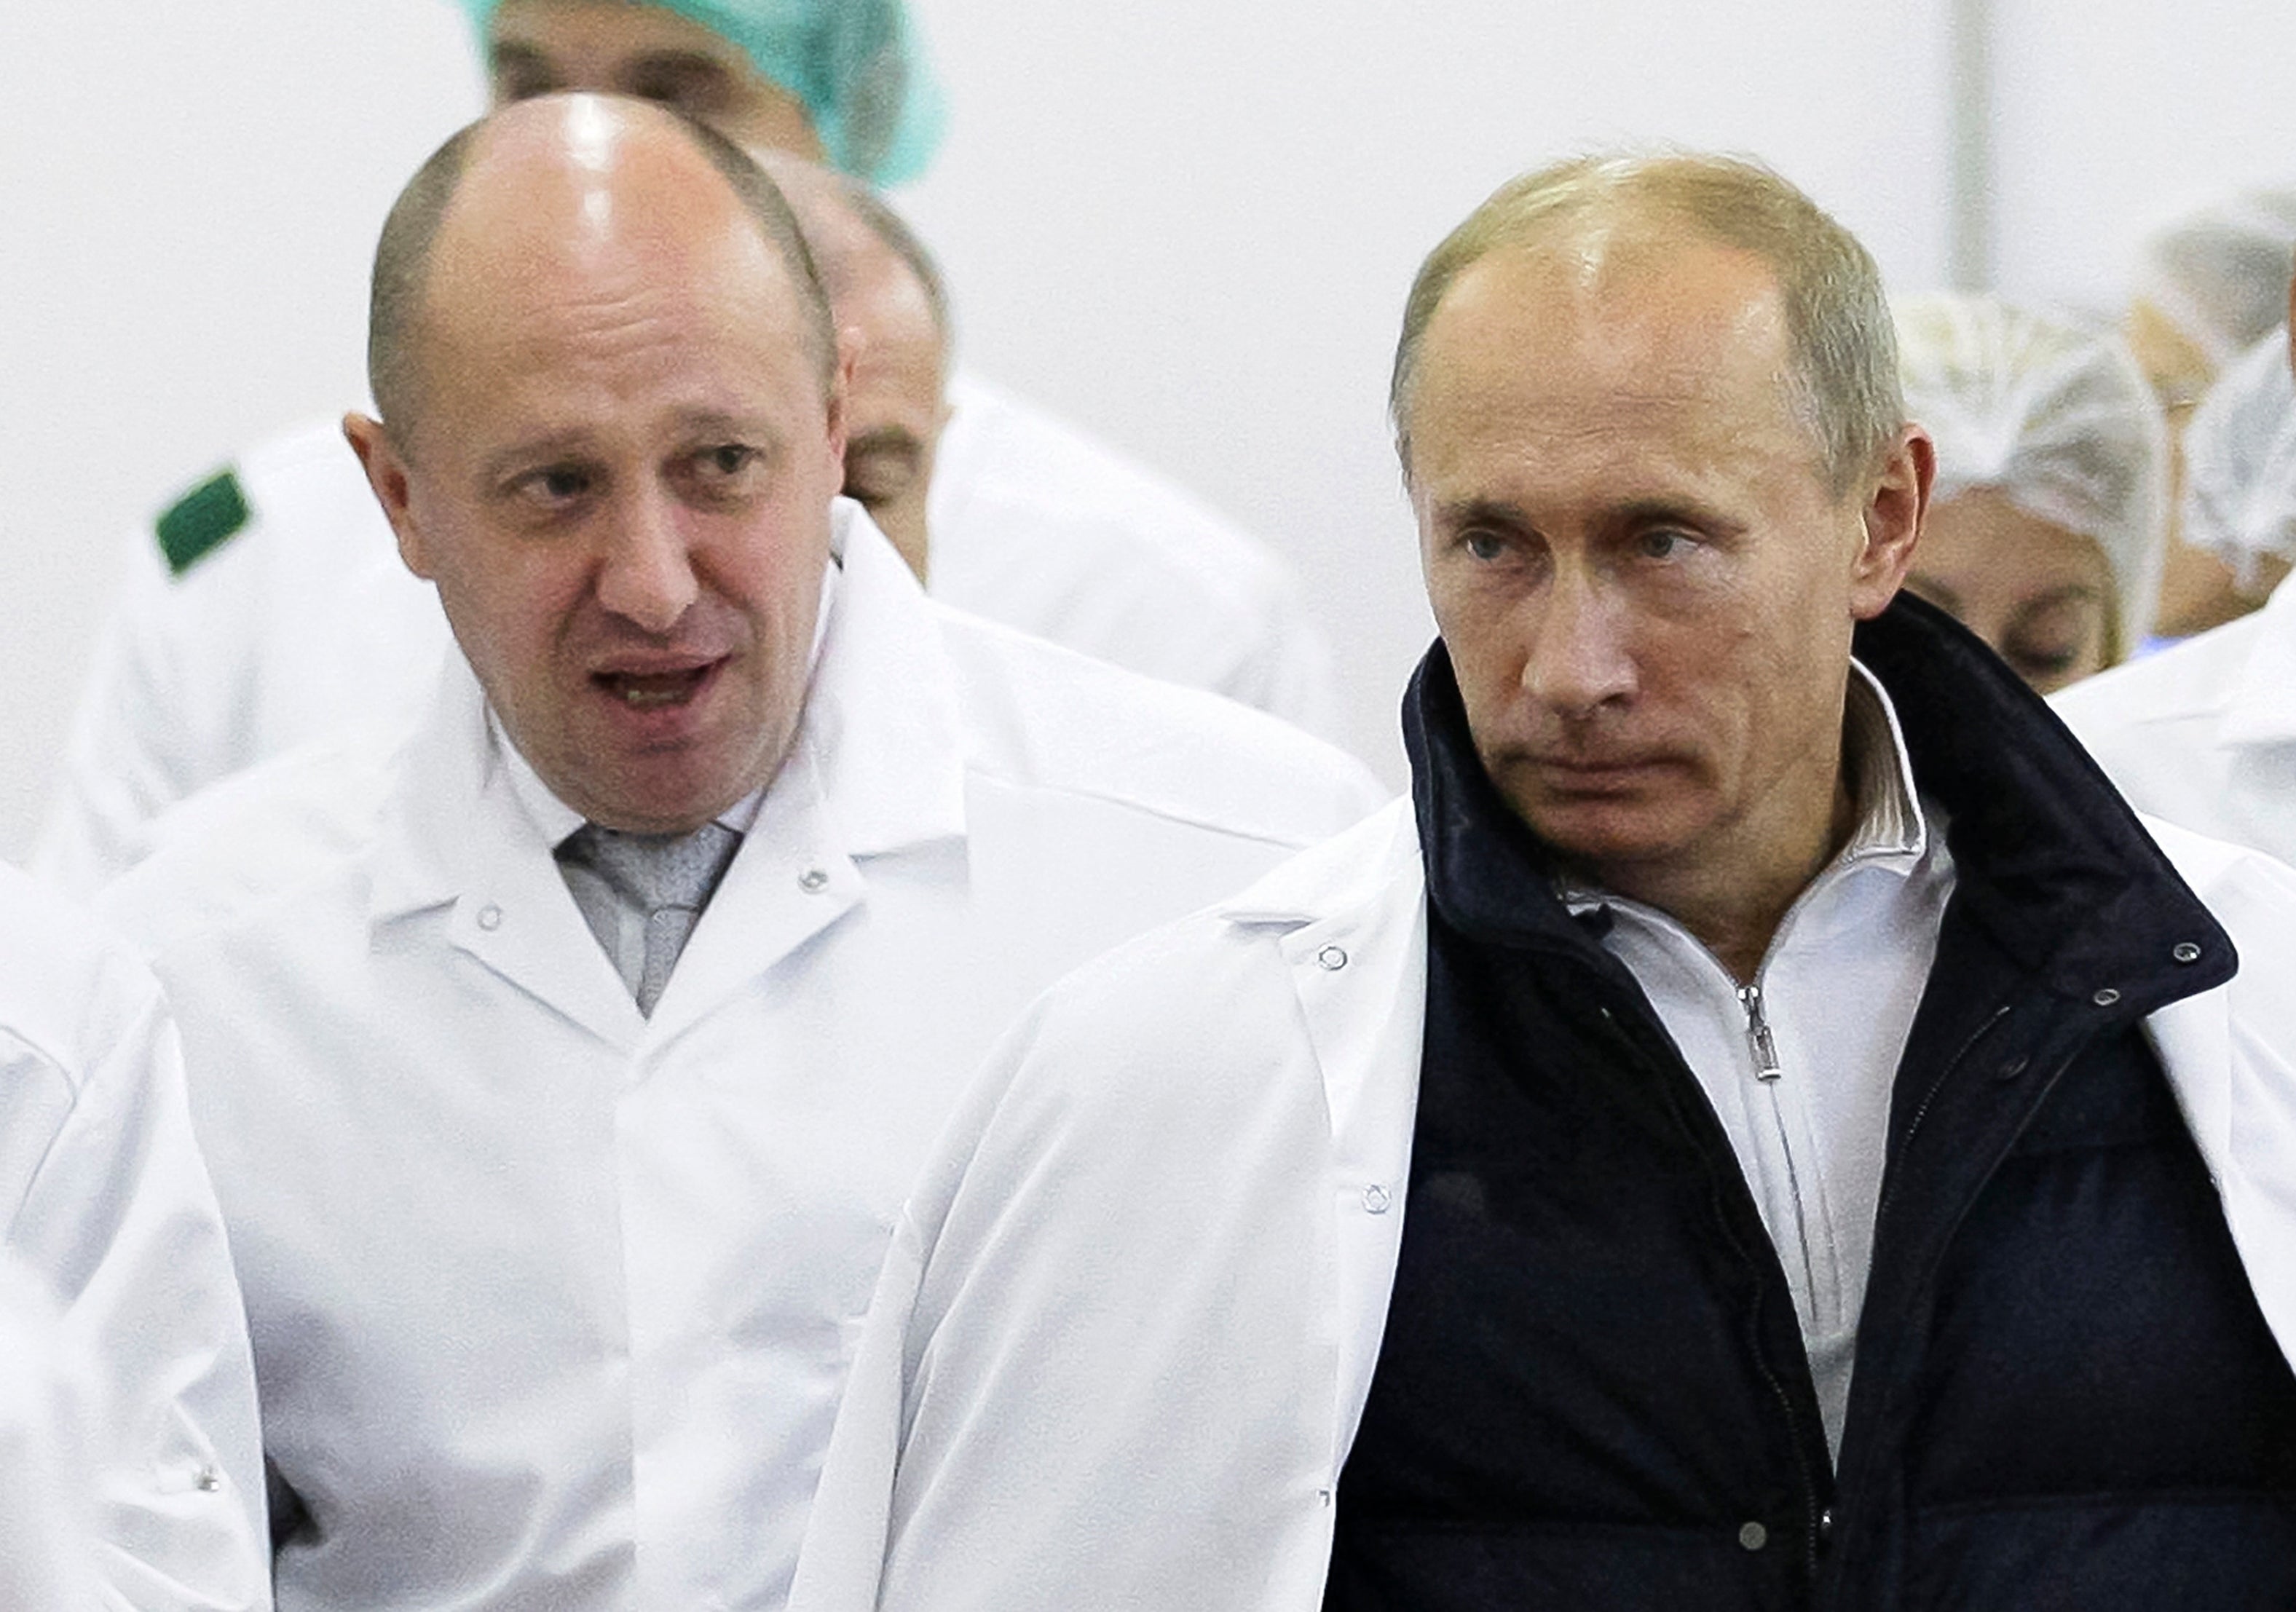 Yevgeny Prigozhin and Vladimir Putin on a tour around the former’s food factory in 2010